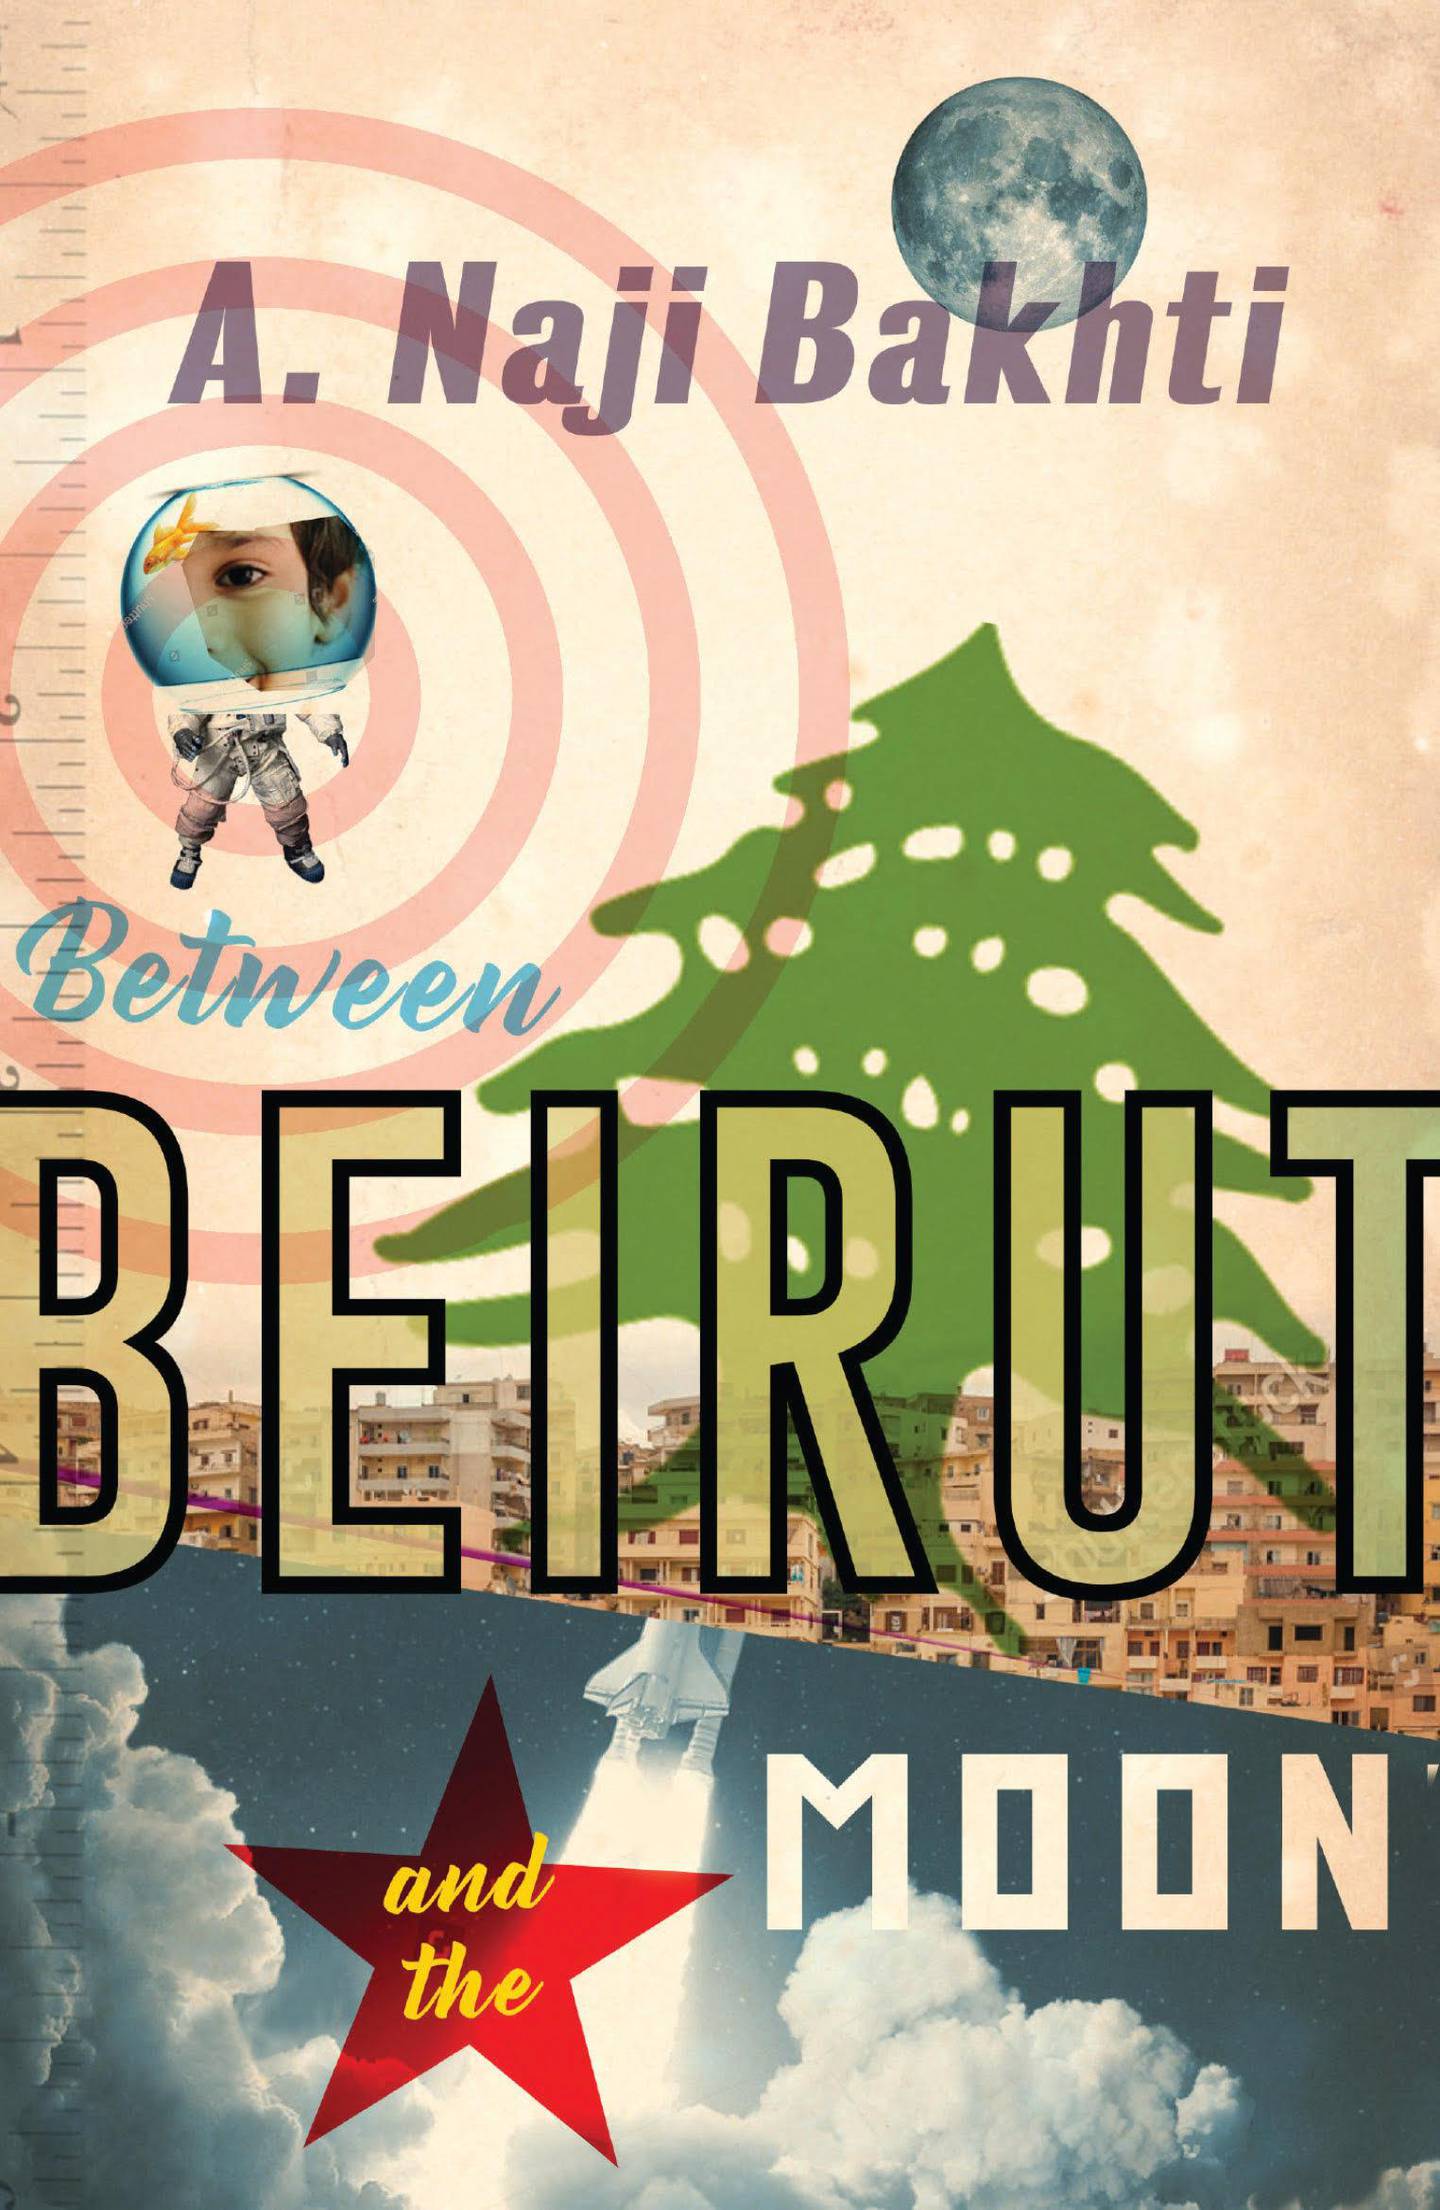 Between Beirut and the Moon by Naji Bakhti. Courtesy Influx Press